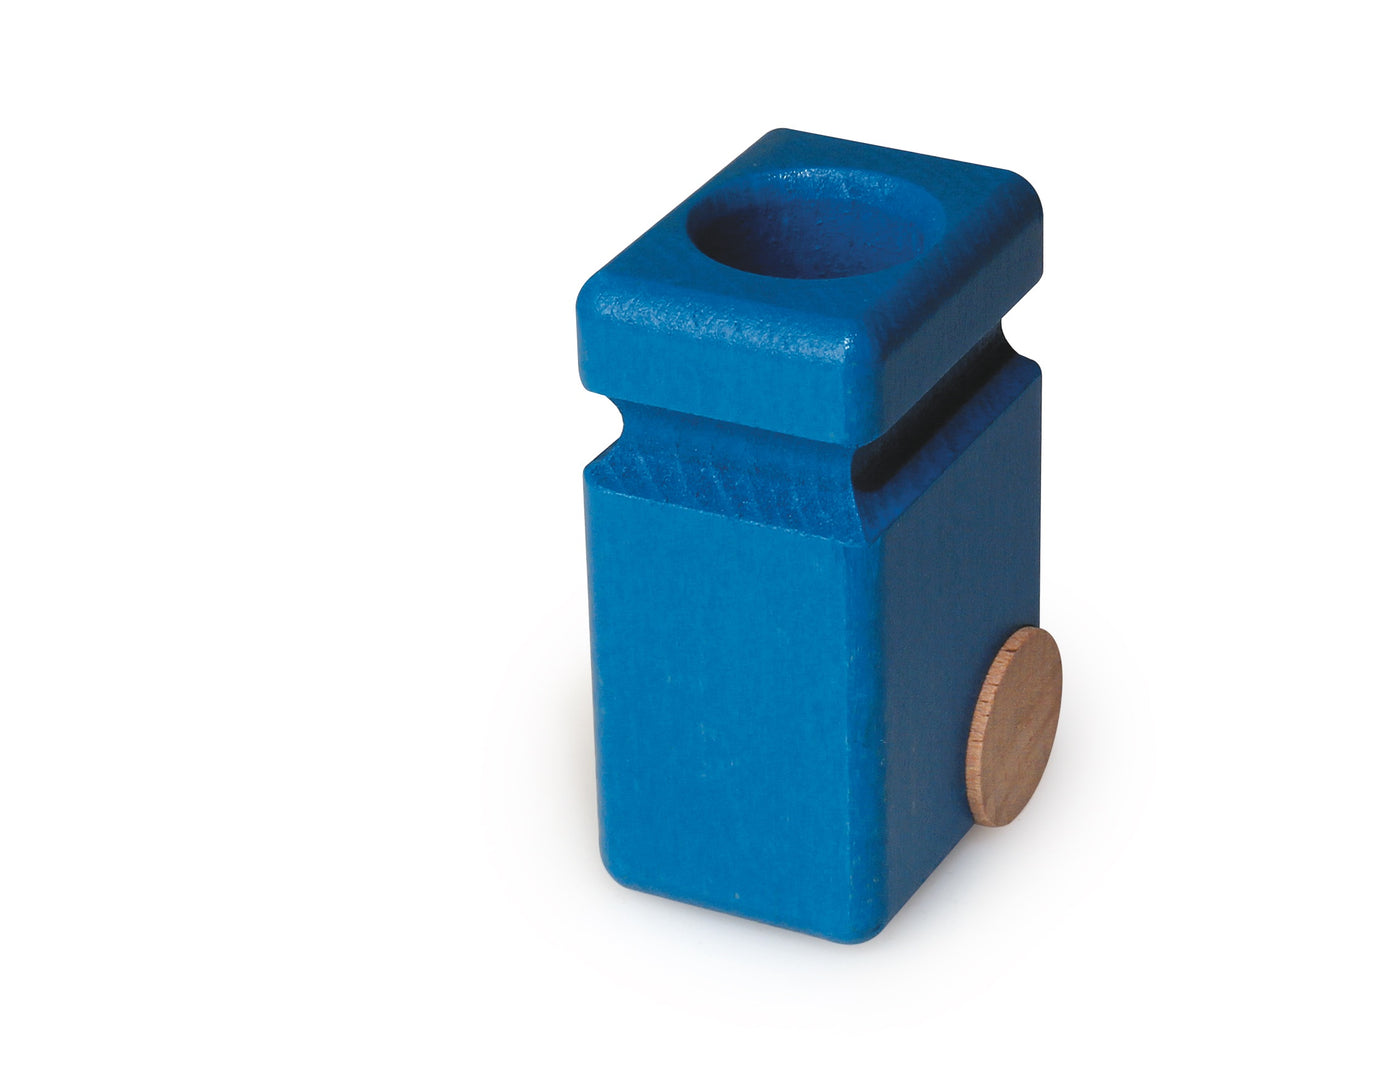 Fagus 2 Garbage Cans (Blue)